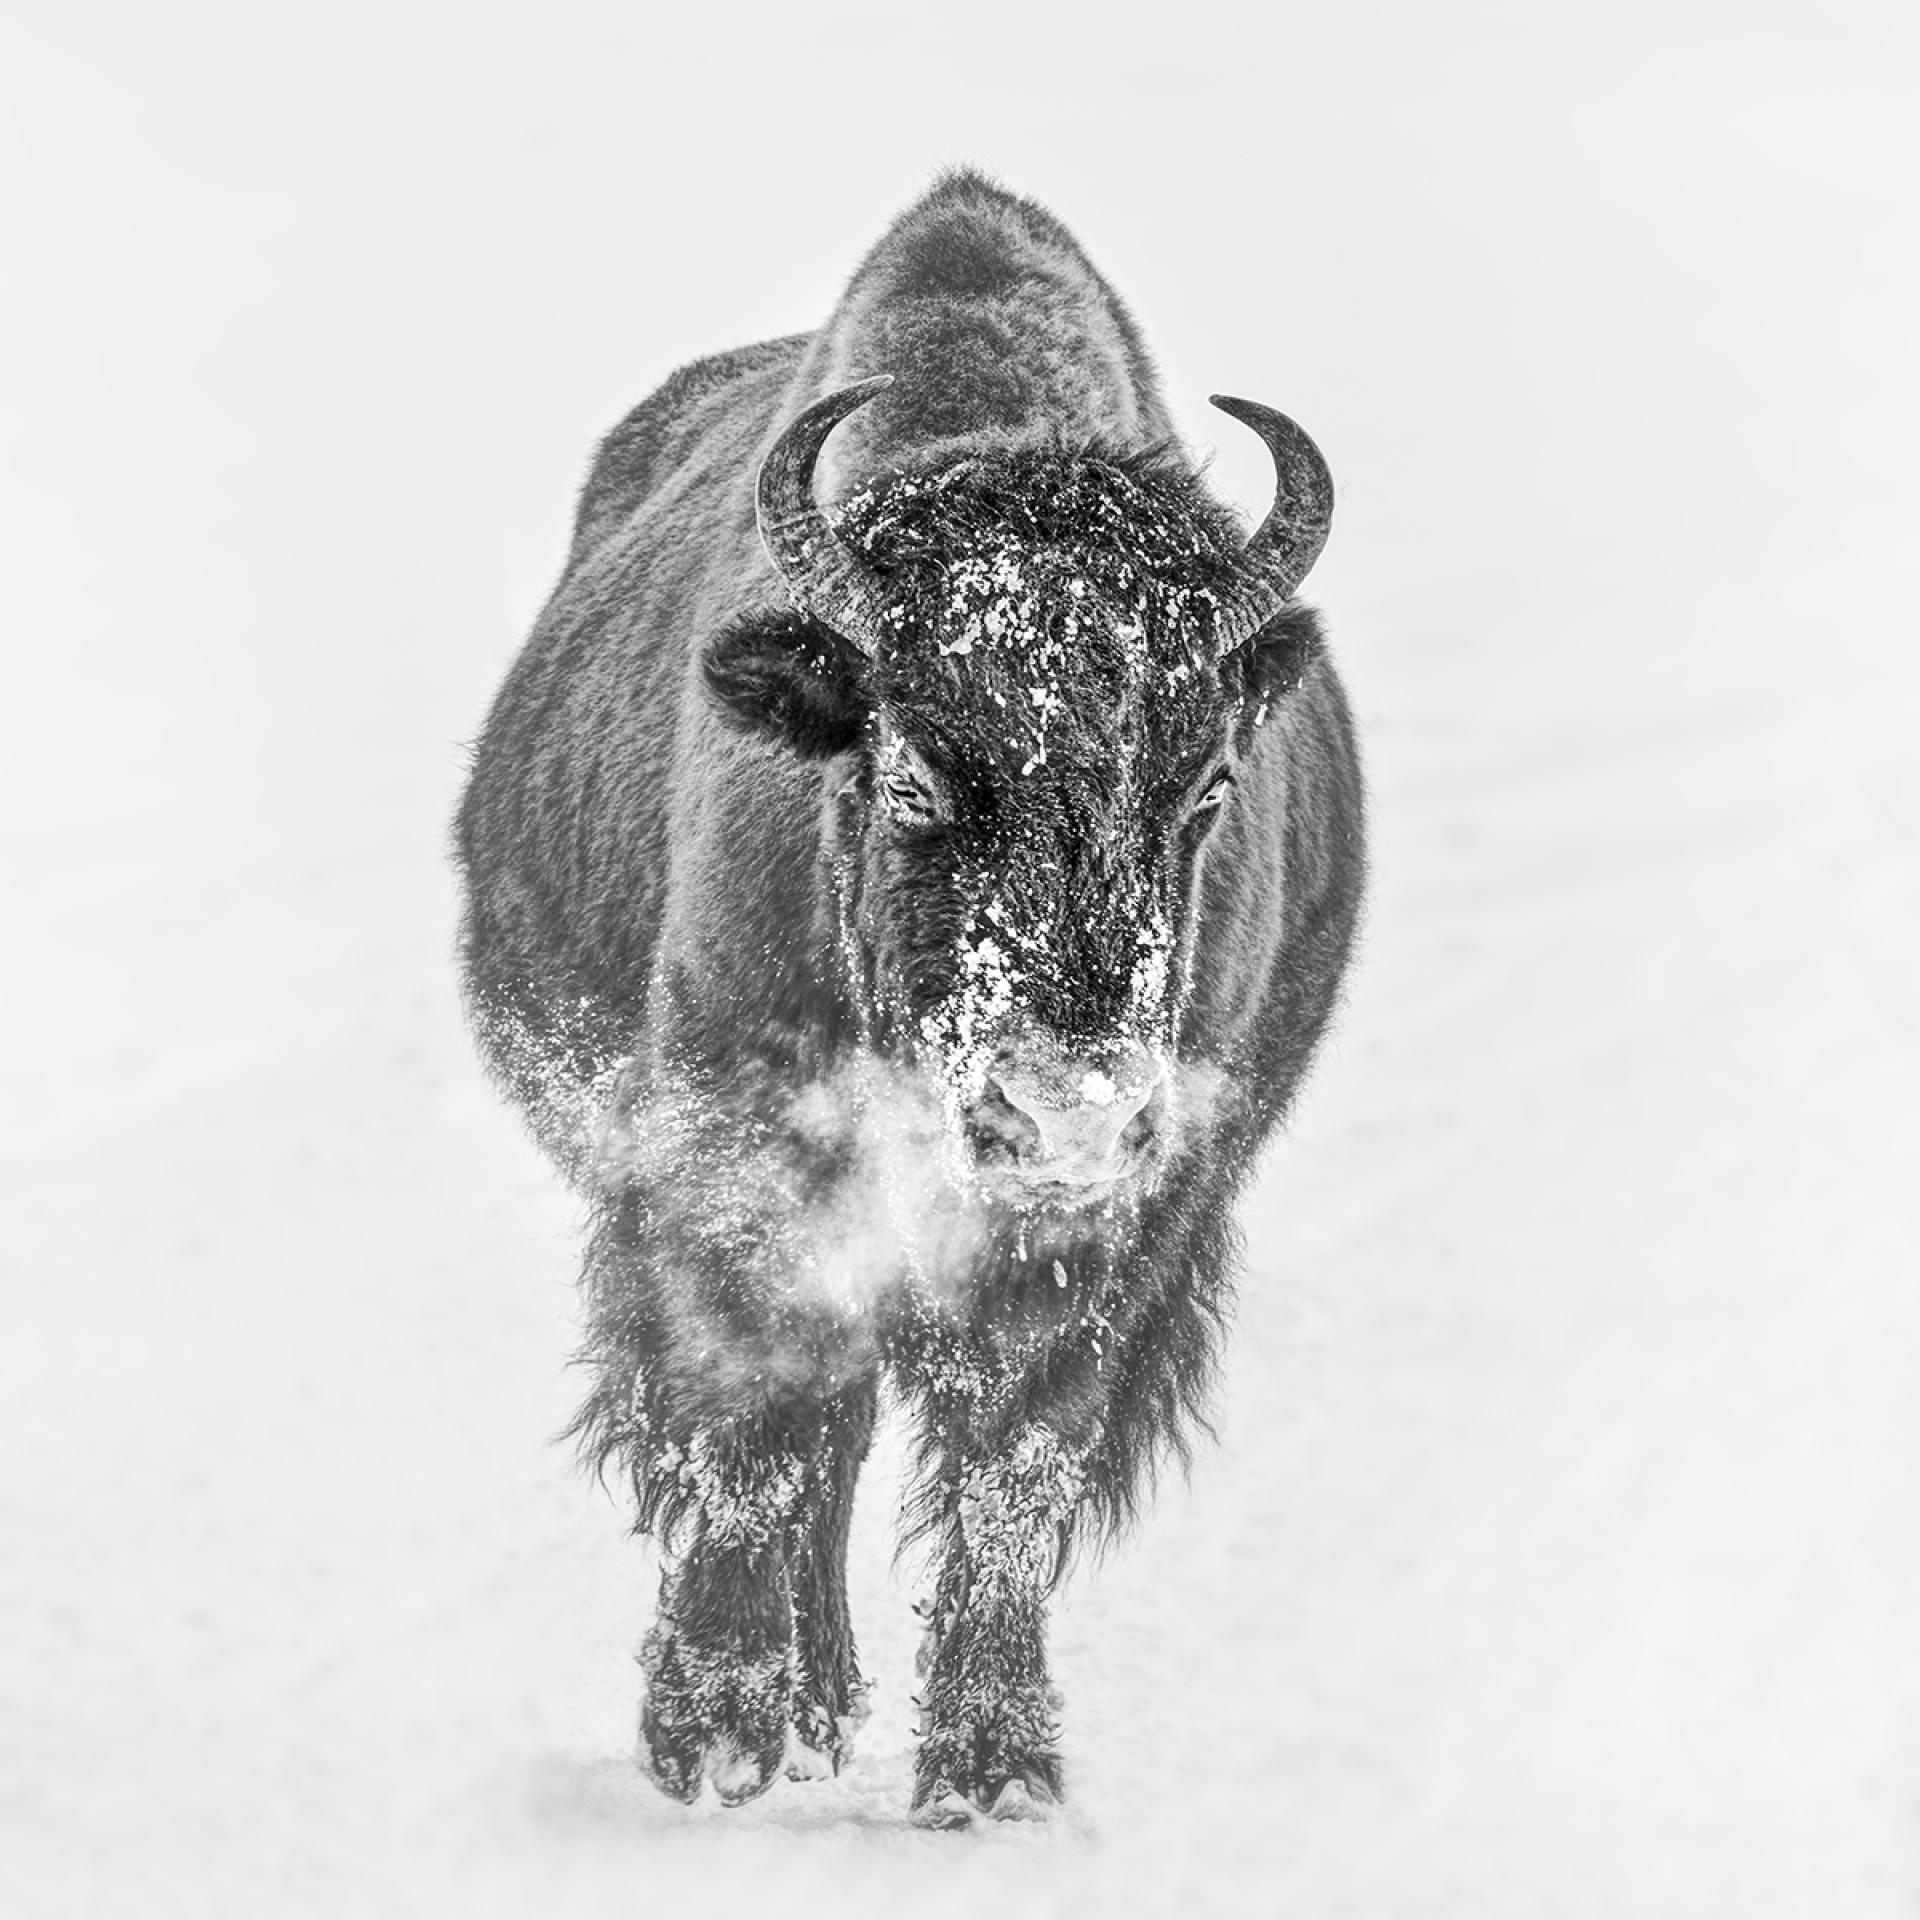 London Photography Awards Winner - The Many Faces of Yellowstone National Park